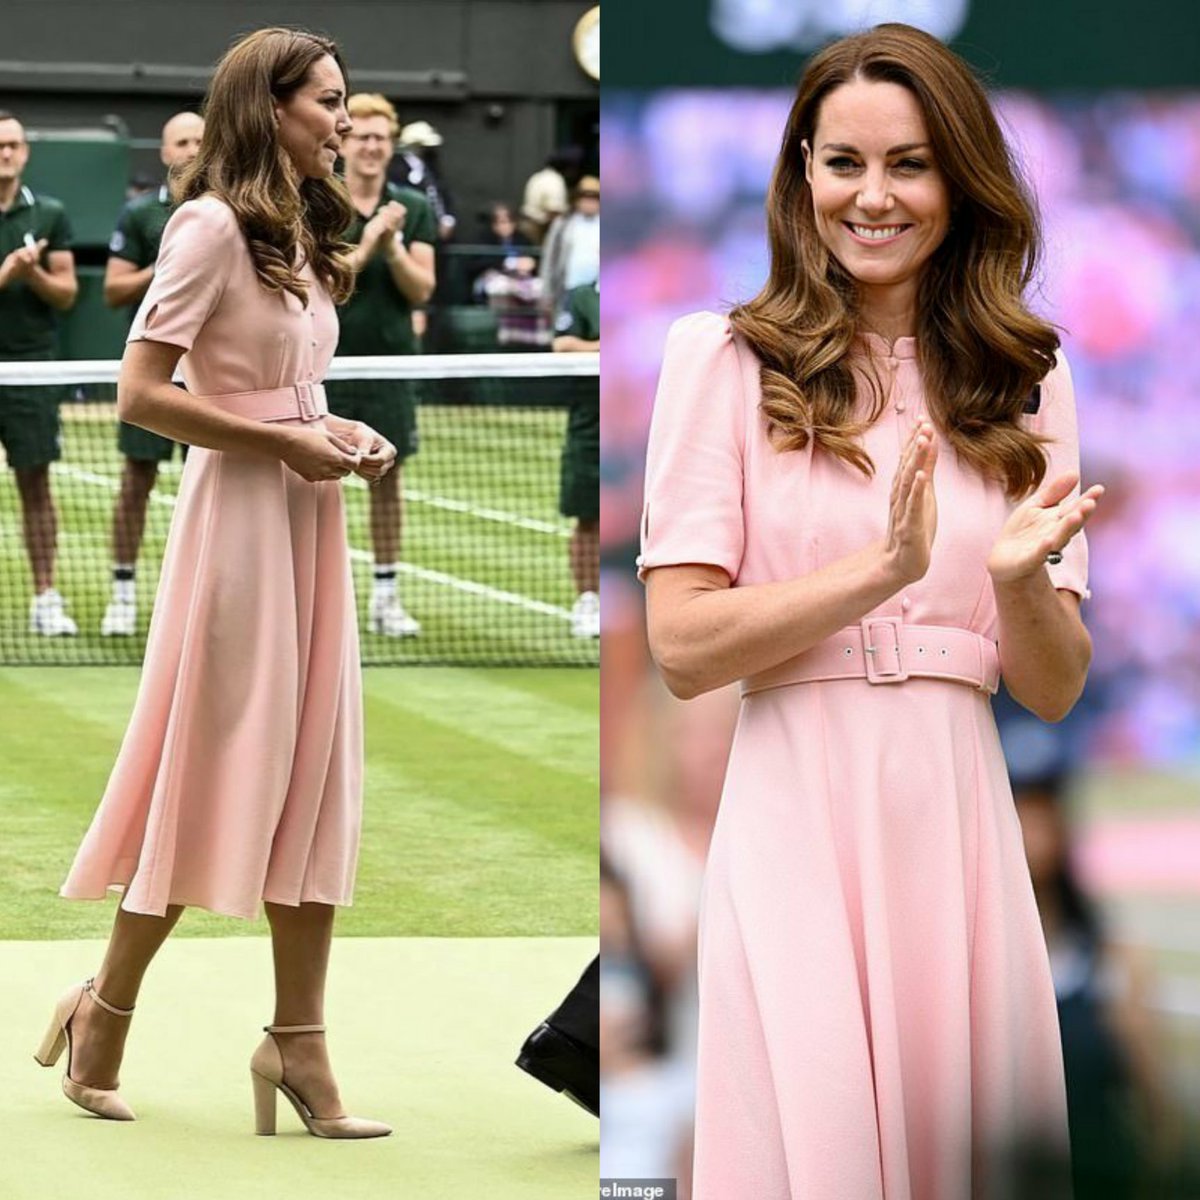 A perfect Princess looking perfectly gorgeous in pink. #PrincessofWales #PrincessCatherine #CatherinePrincessOfWales #TeamCatherine #TeamWales #RoyalFamily #IStandWithCatherine #CatherineWeLoveYou #CatherineIsQueen #PrincessCatherineOfWales @KensingtonRoyal